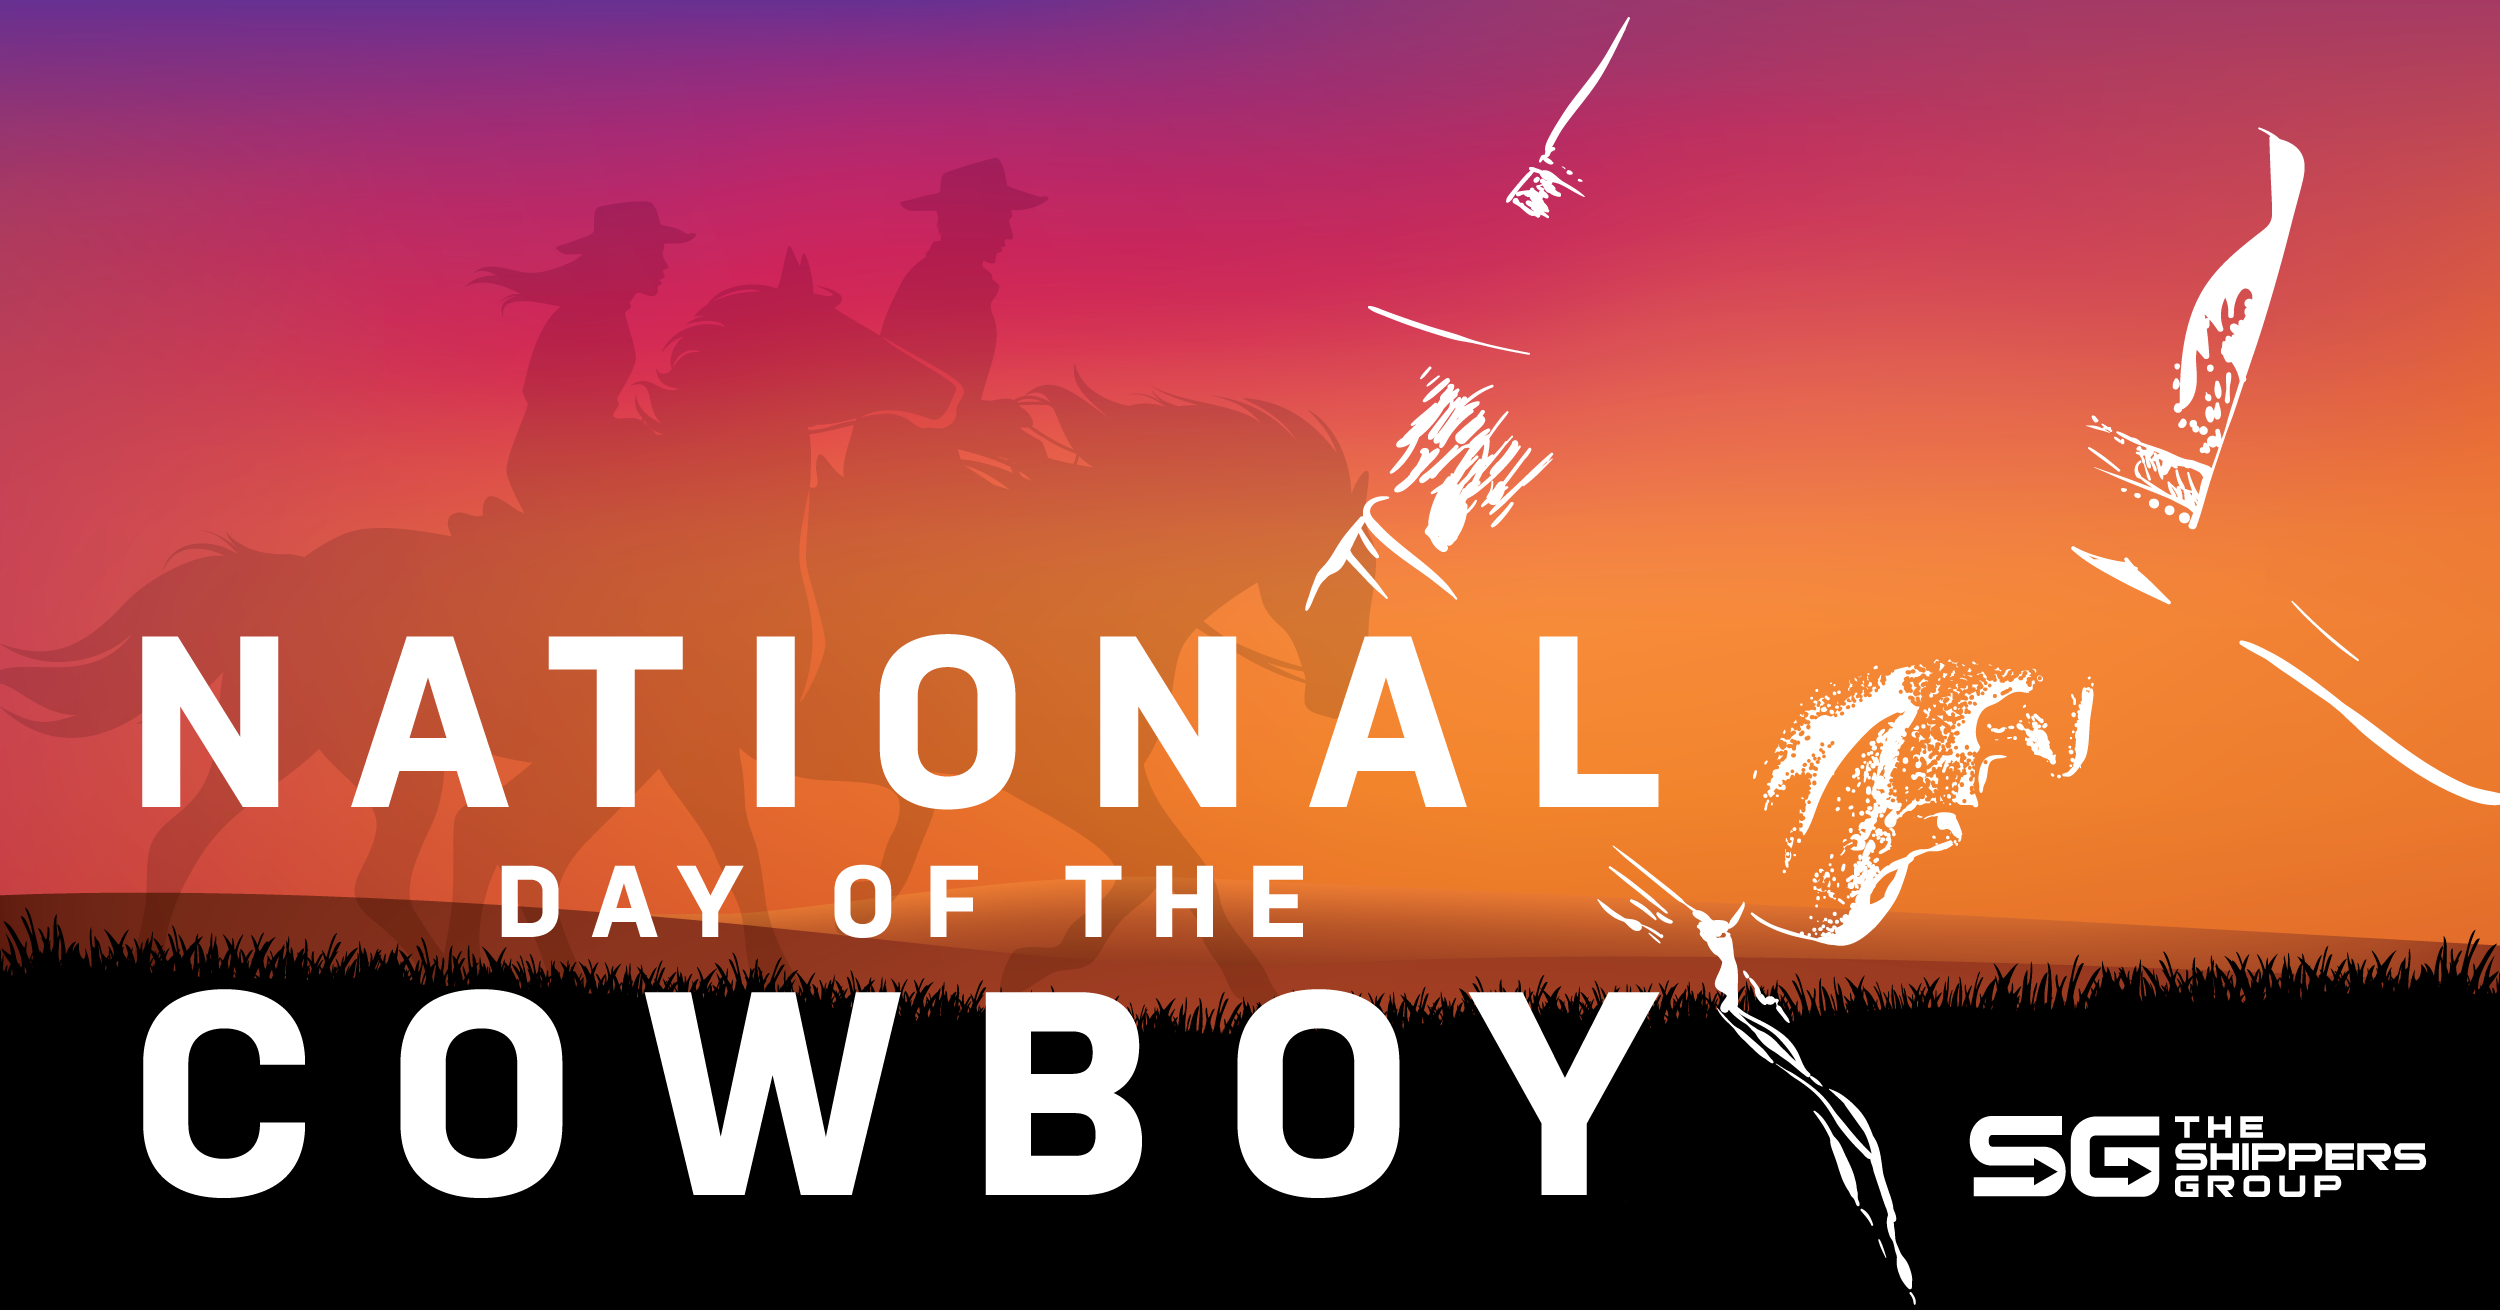 National Day of the Cowboy at The Shippers Group